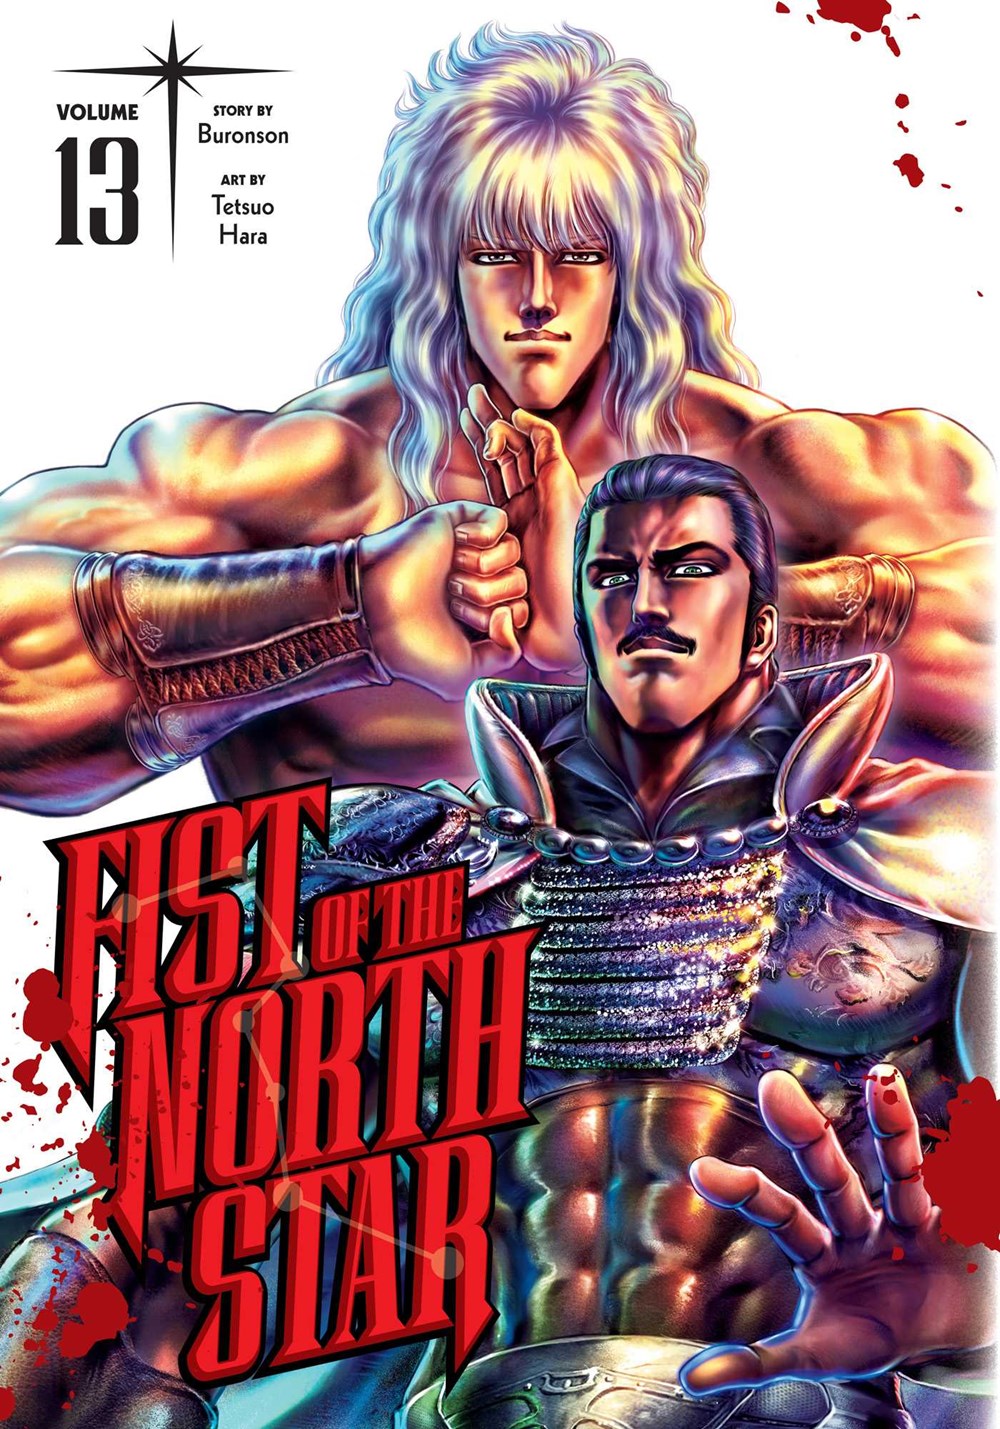 Fist of the North Star Manga Volume 13 (Hardcover) image count 0